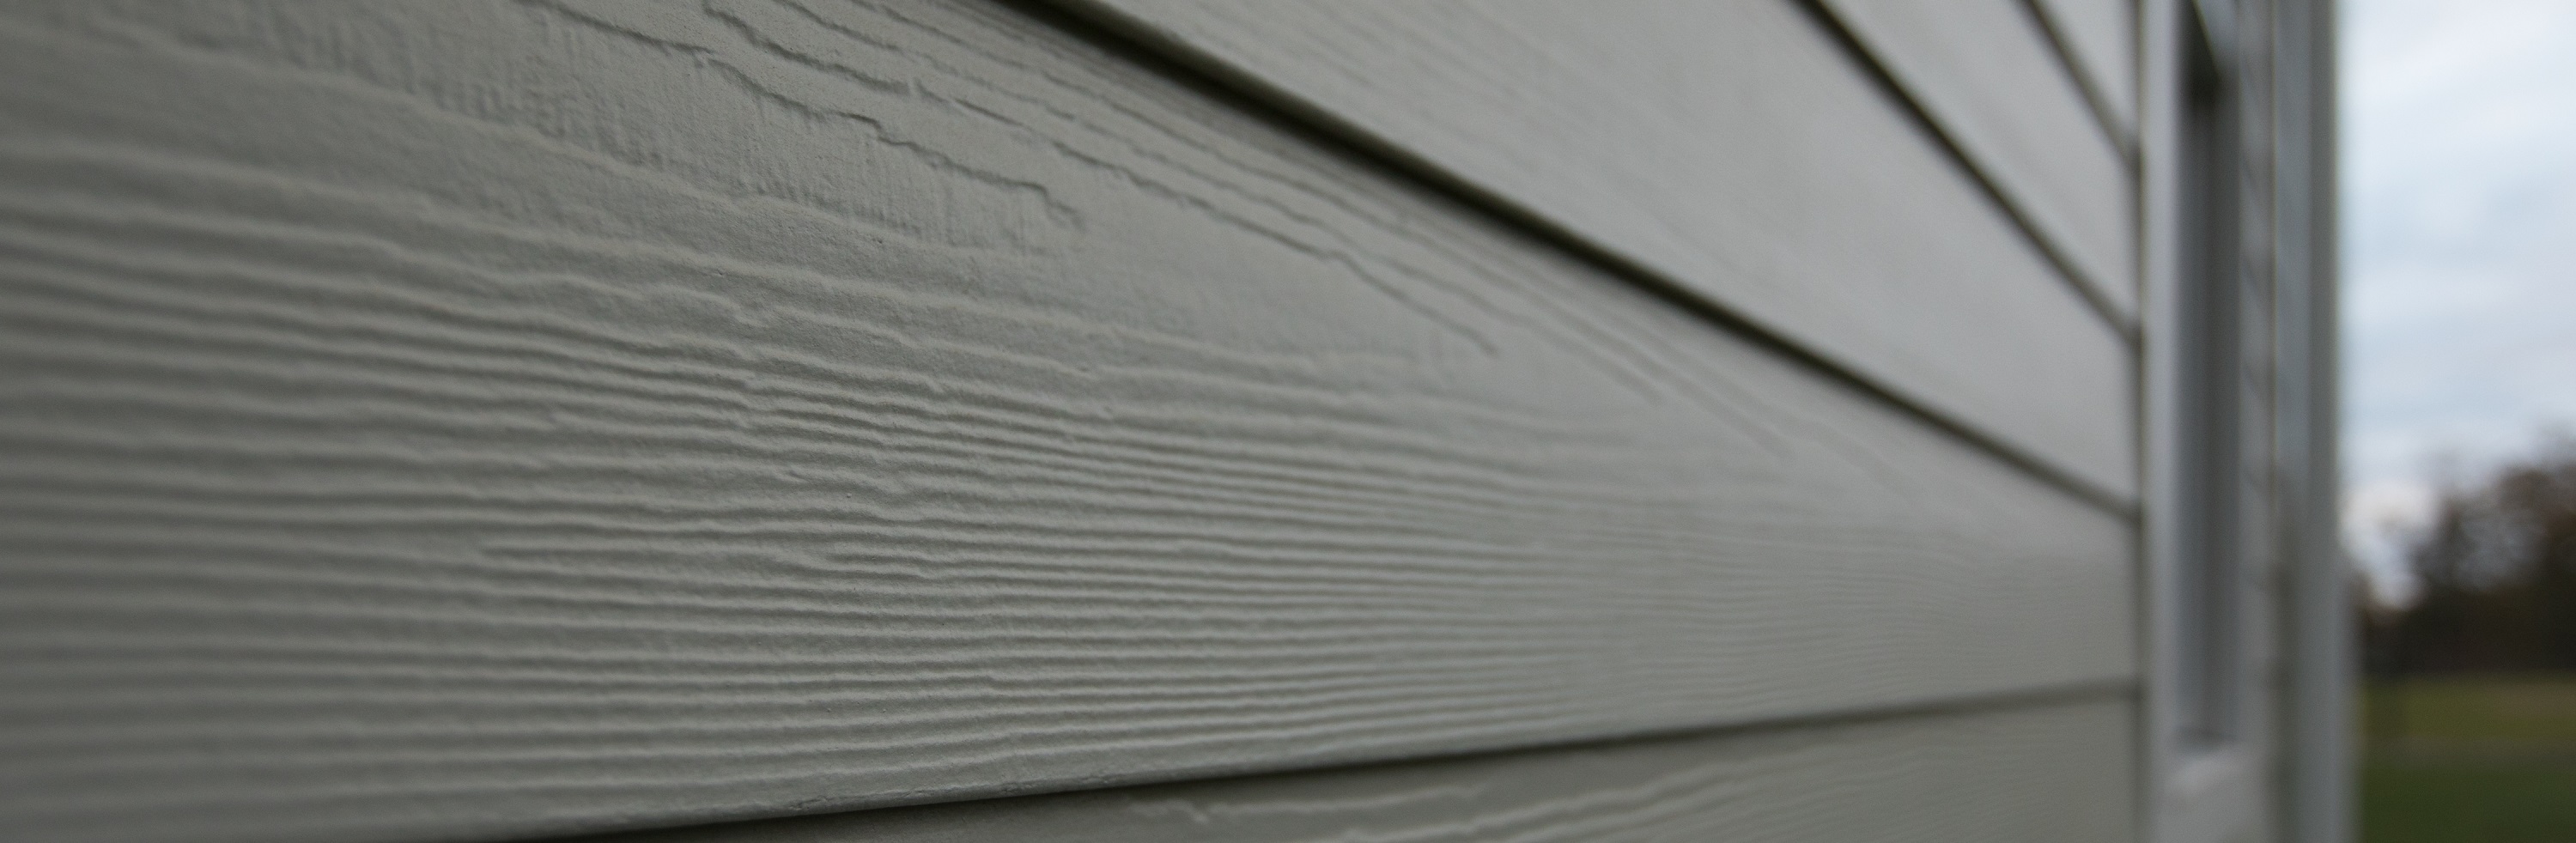 Repainting vs Replacing Your Home’s Siding